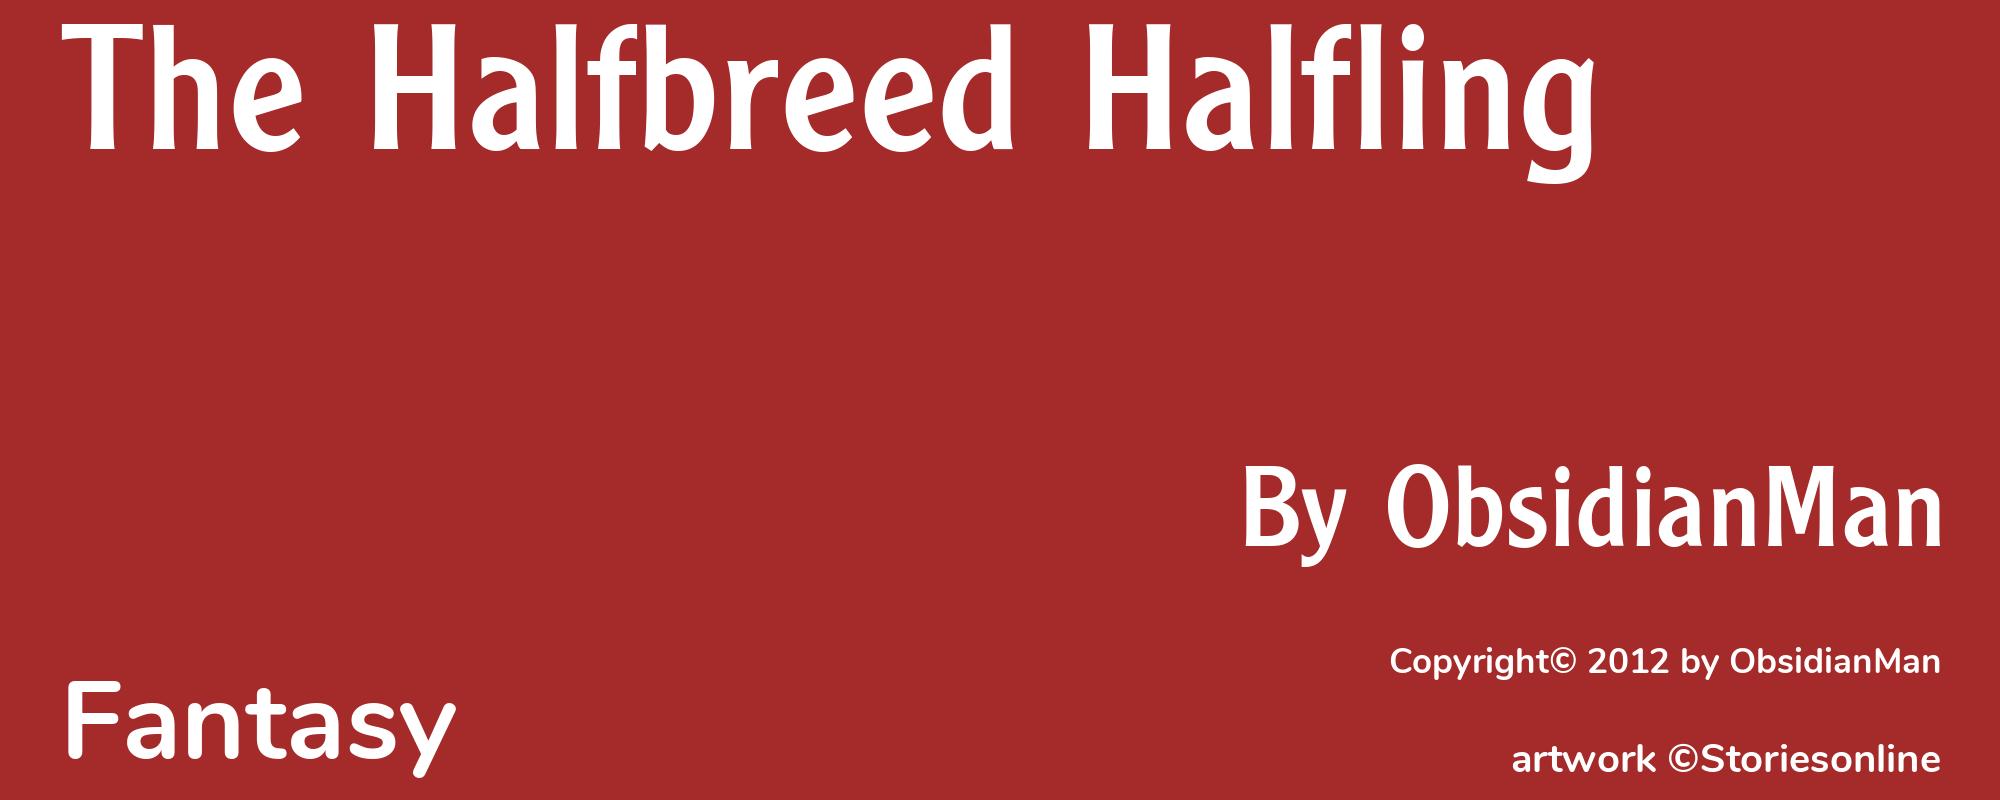 The Halfbreed Halfling - Cover